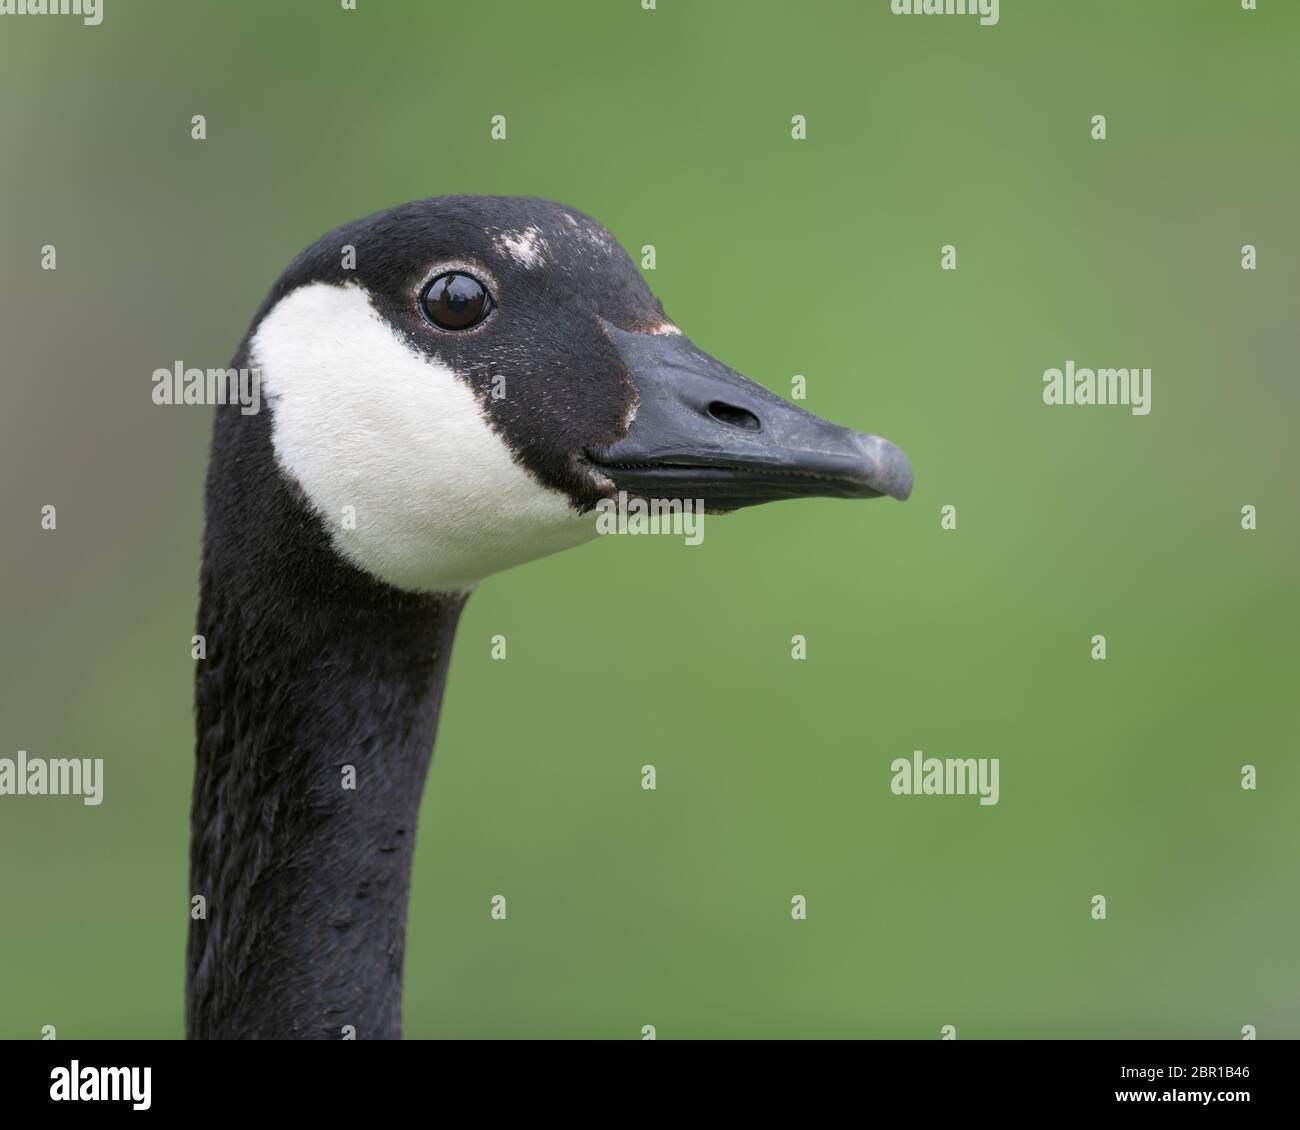 Adult Canada goose closeup portrait against clean green background Stock Photo